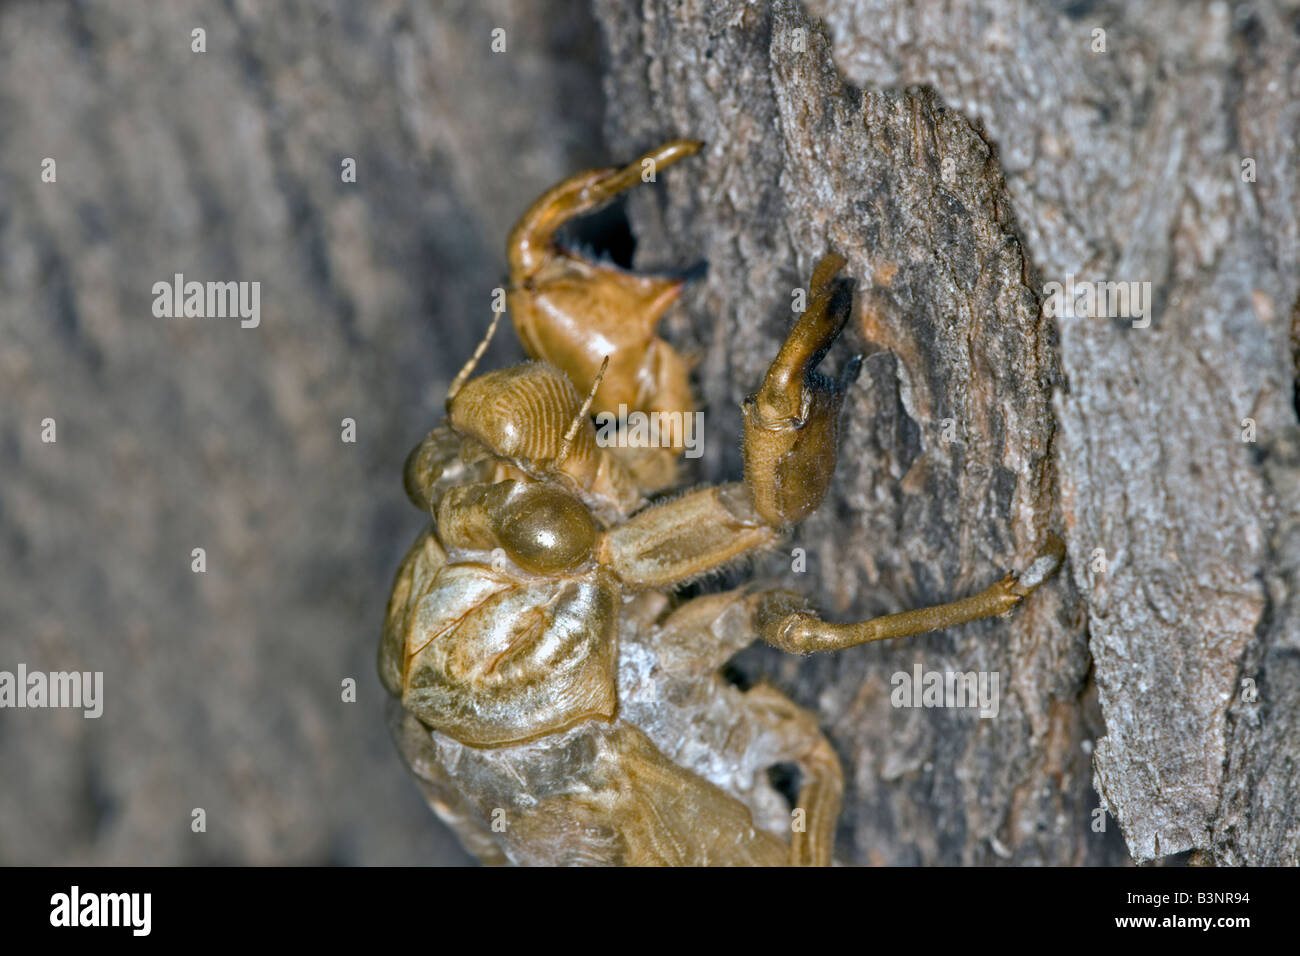 Nymphal shell (exuviae) of a recently hatched Australian cicada on a tree trunk. Stock Photo